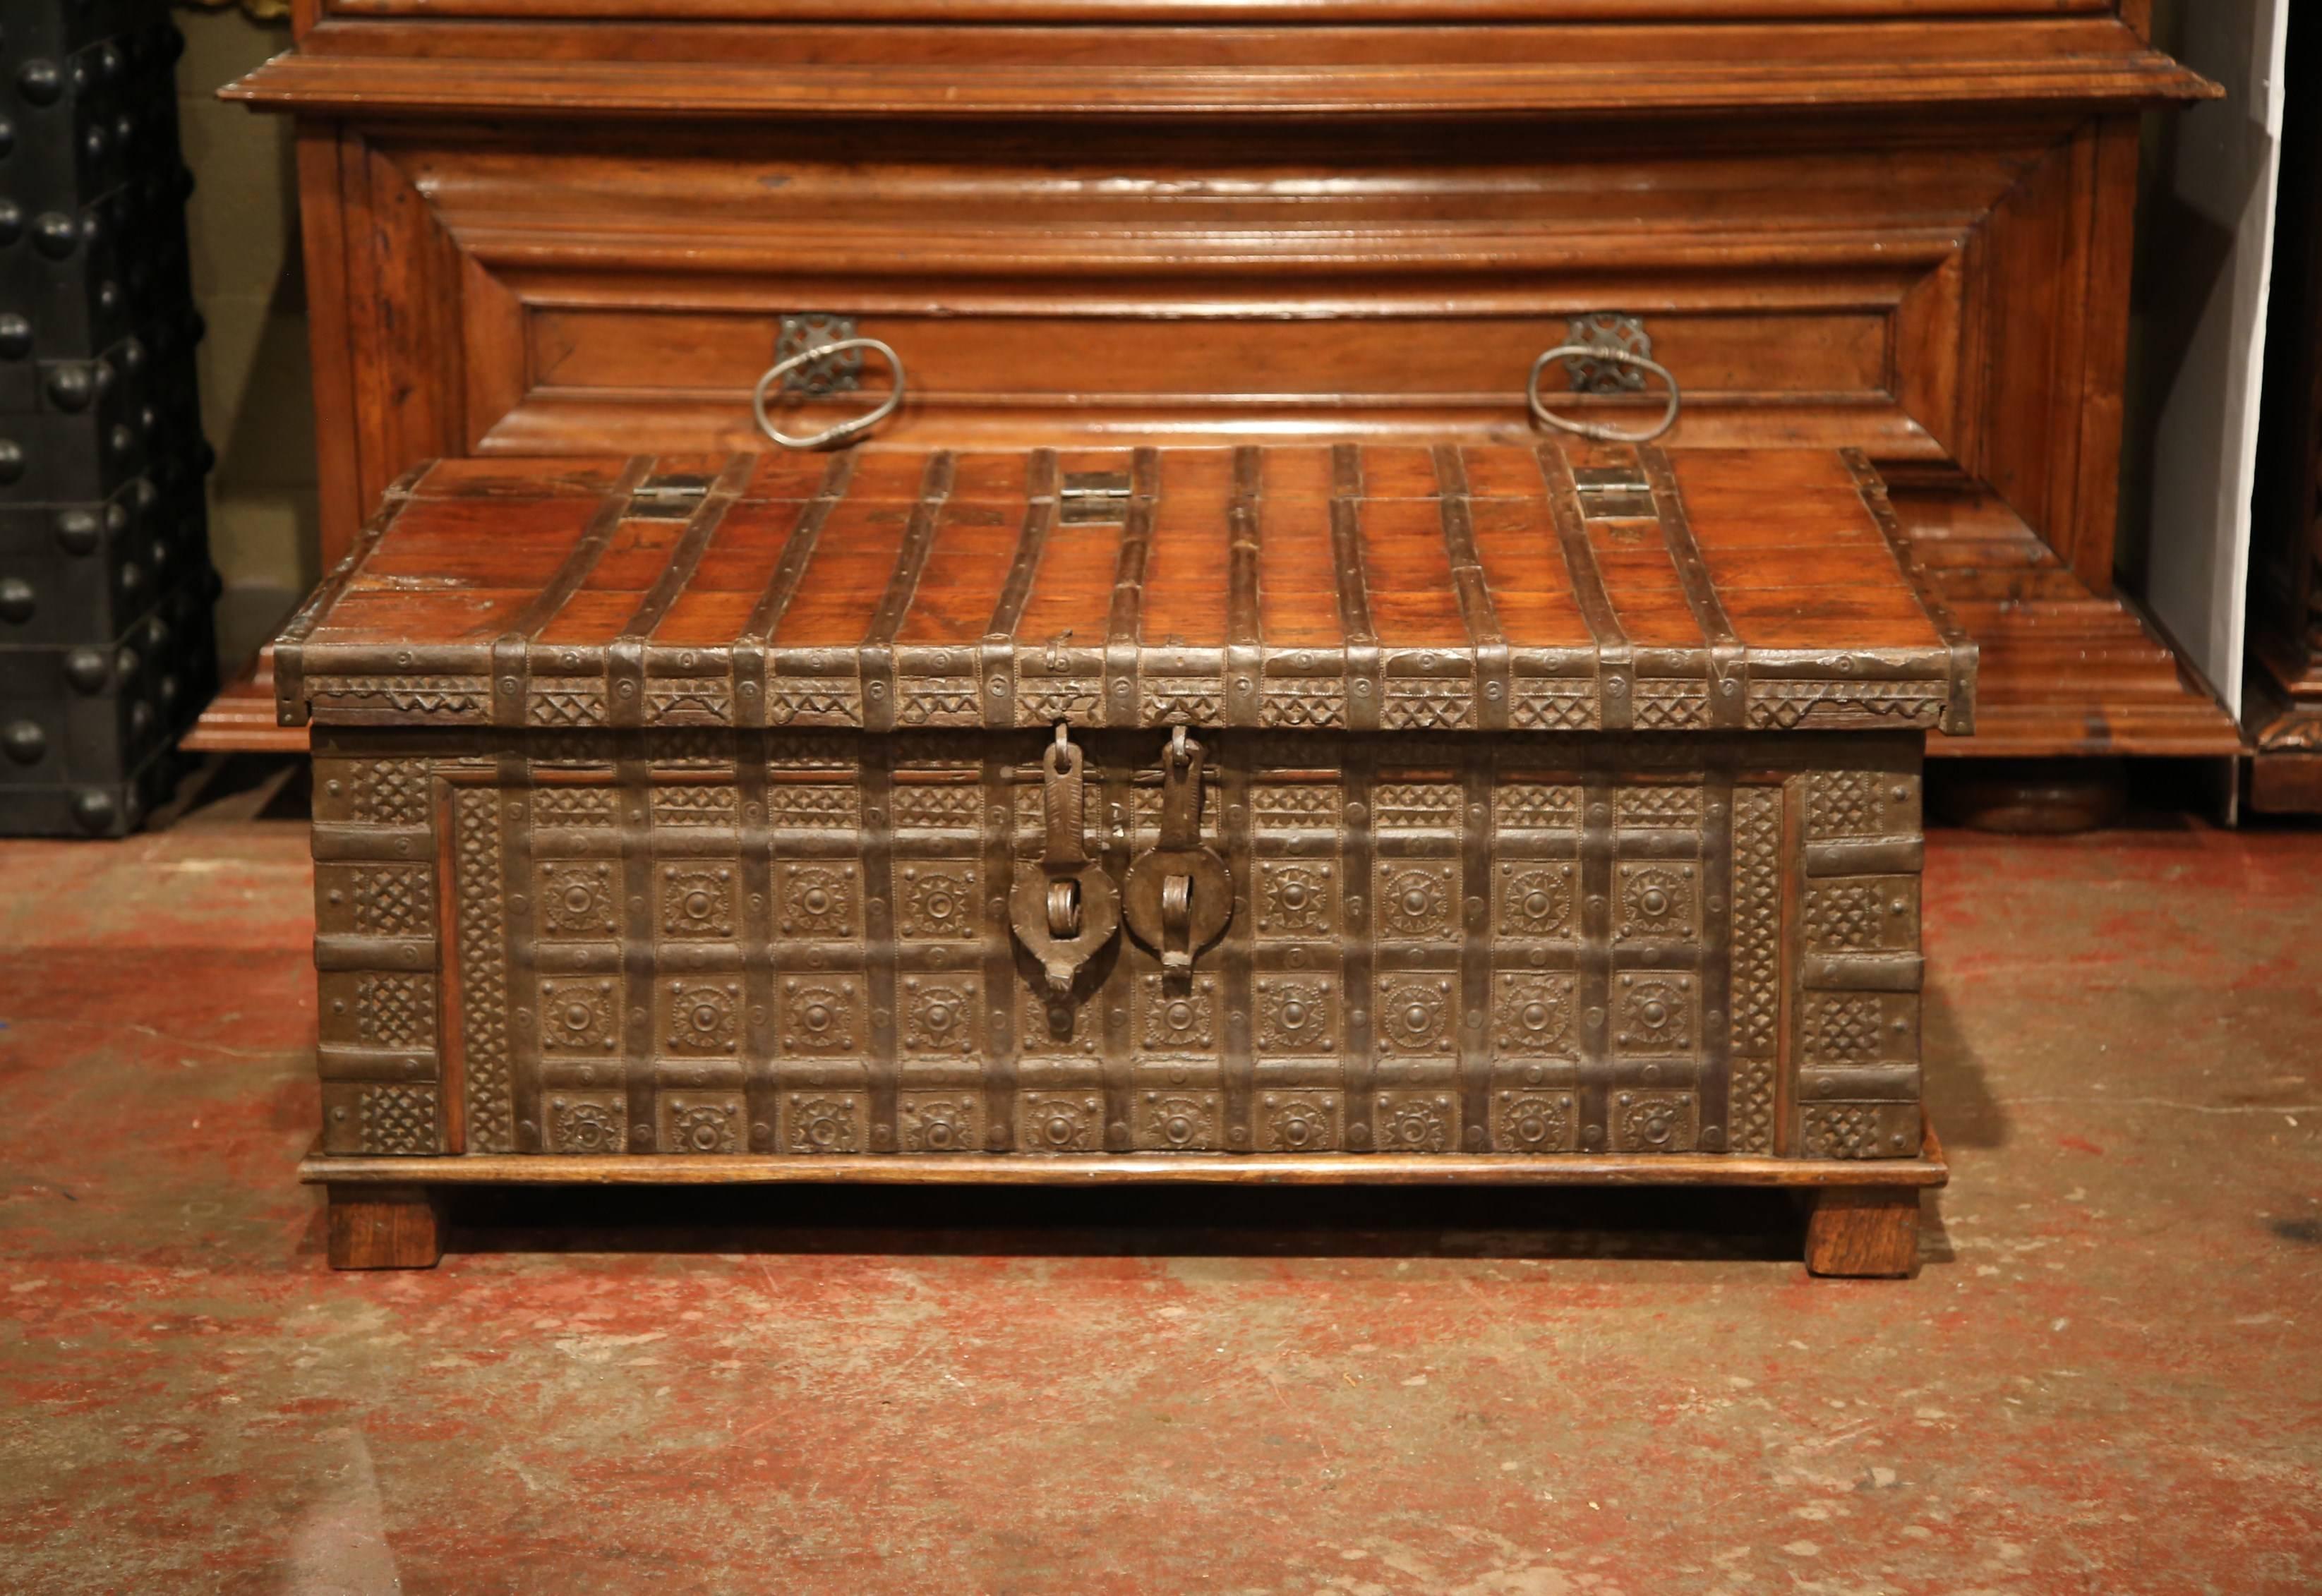 This unusual, antique fruitwood chest was carved in England, circa 1880. The trunk is a grand statement piece, and could be used at the foot of a bed, or as a coffee table in a living room. The piece has heavy forged iron handles, a prominent lock